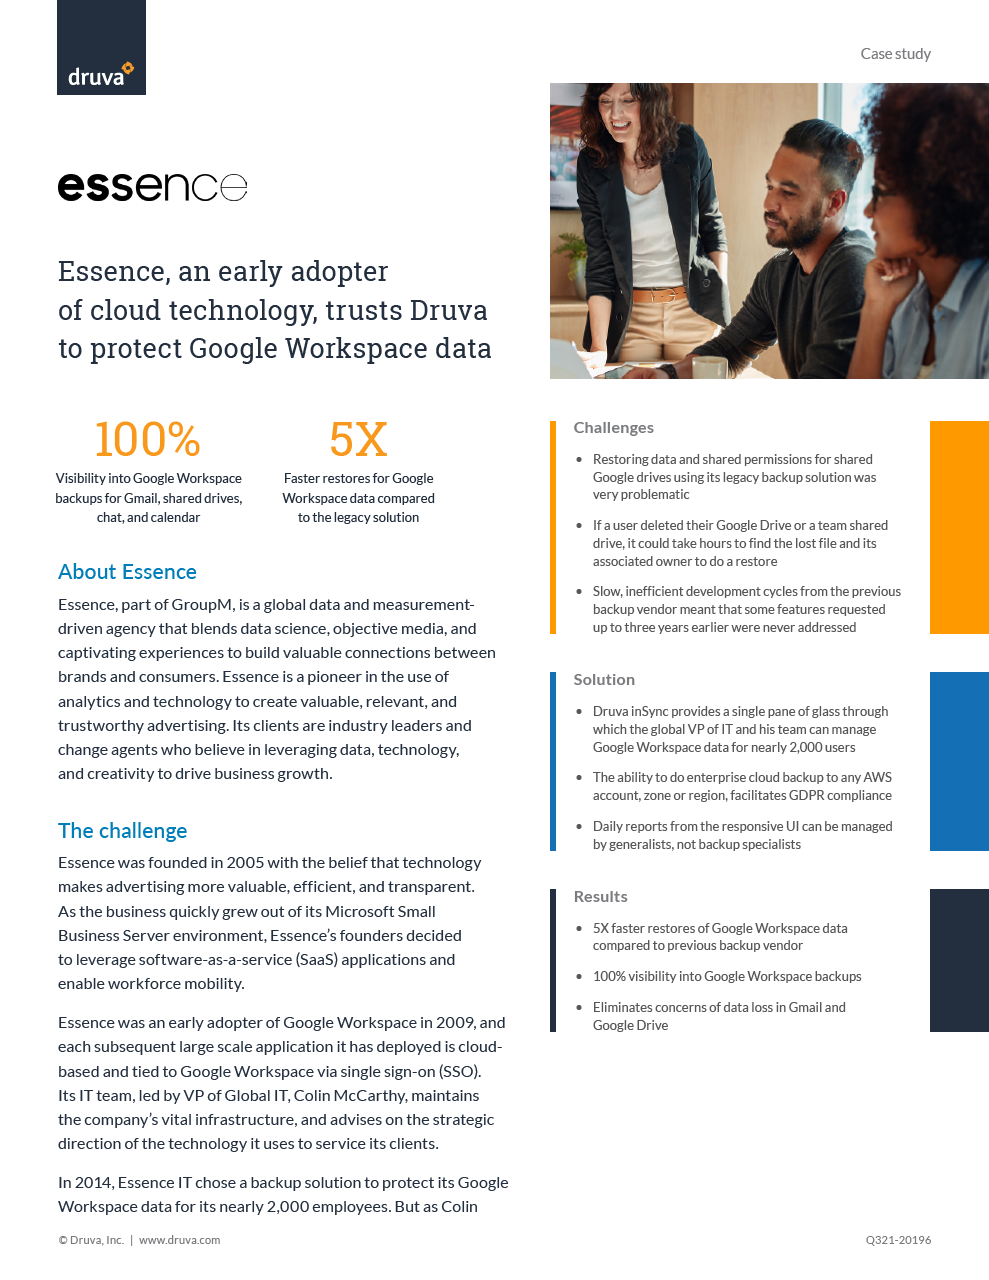 Essence, an early adopter of cloud technology, trusts Druva to protect Google Workspace data